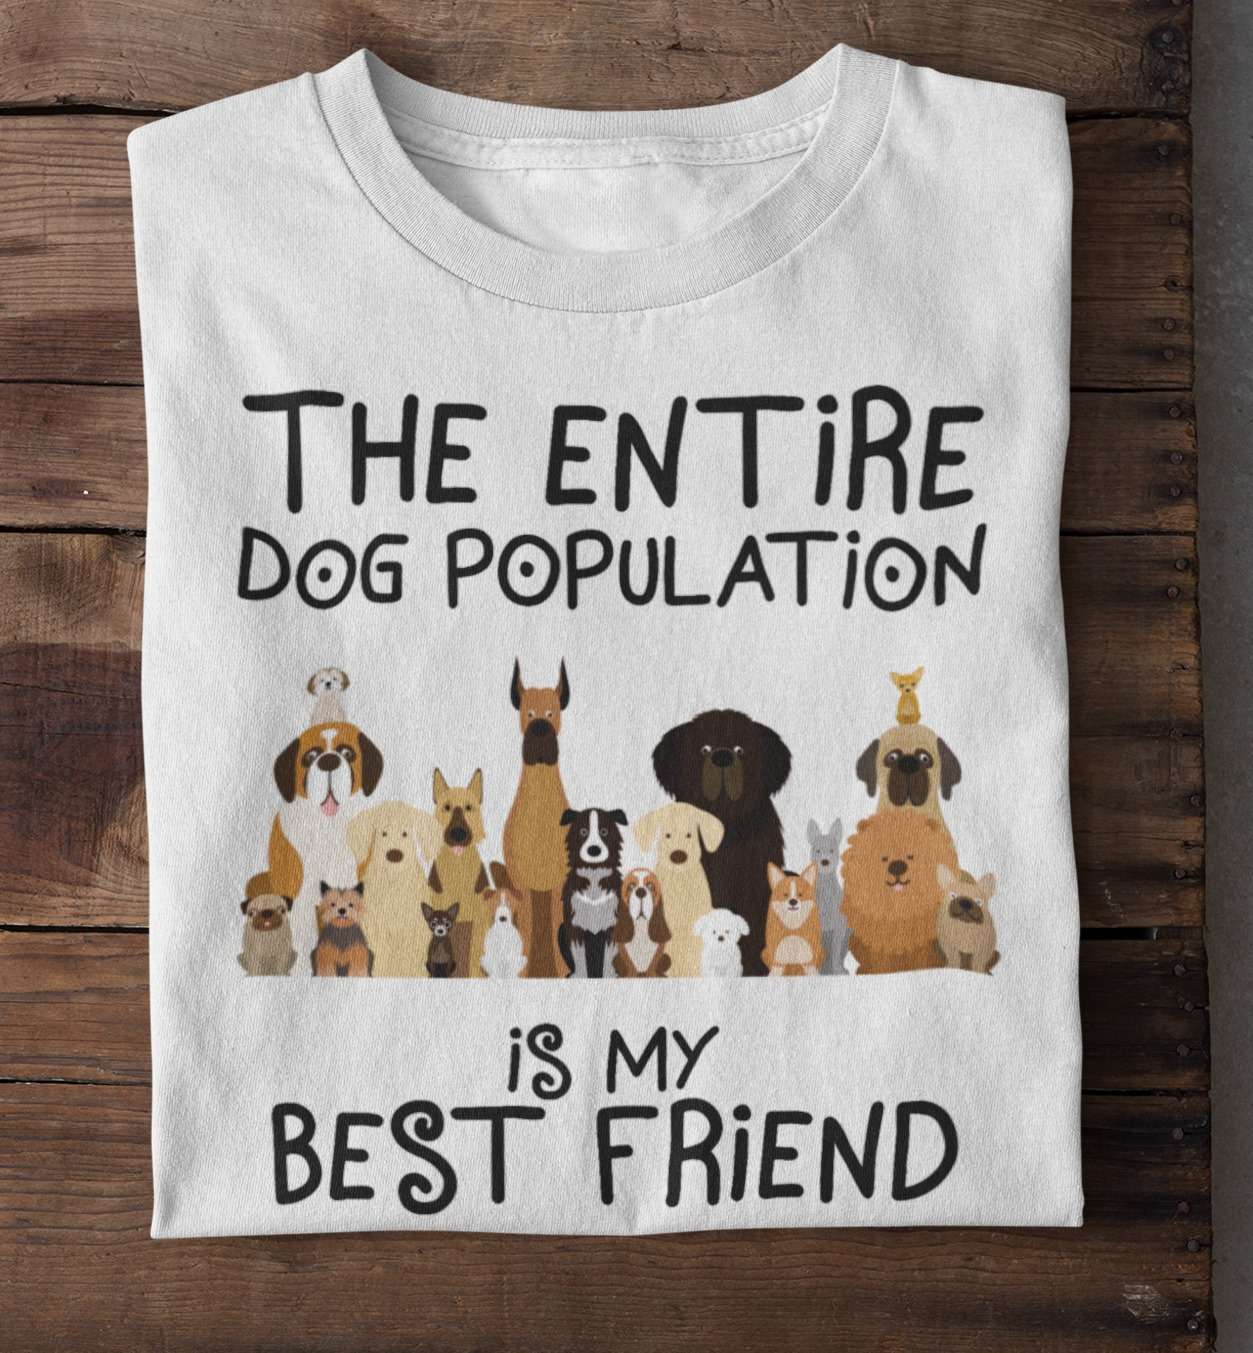 Love Dogs - The entire dog population is my best friend